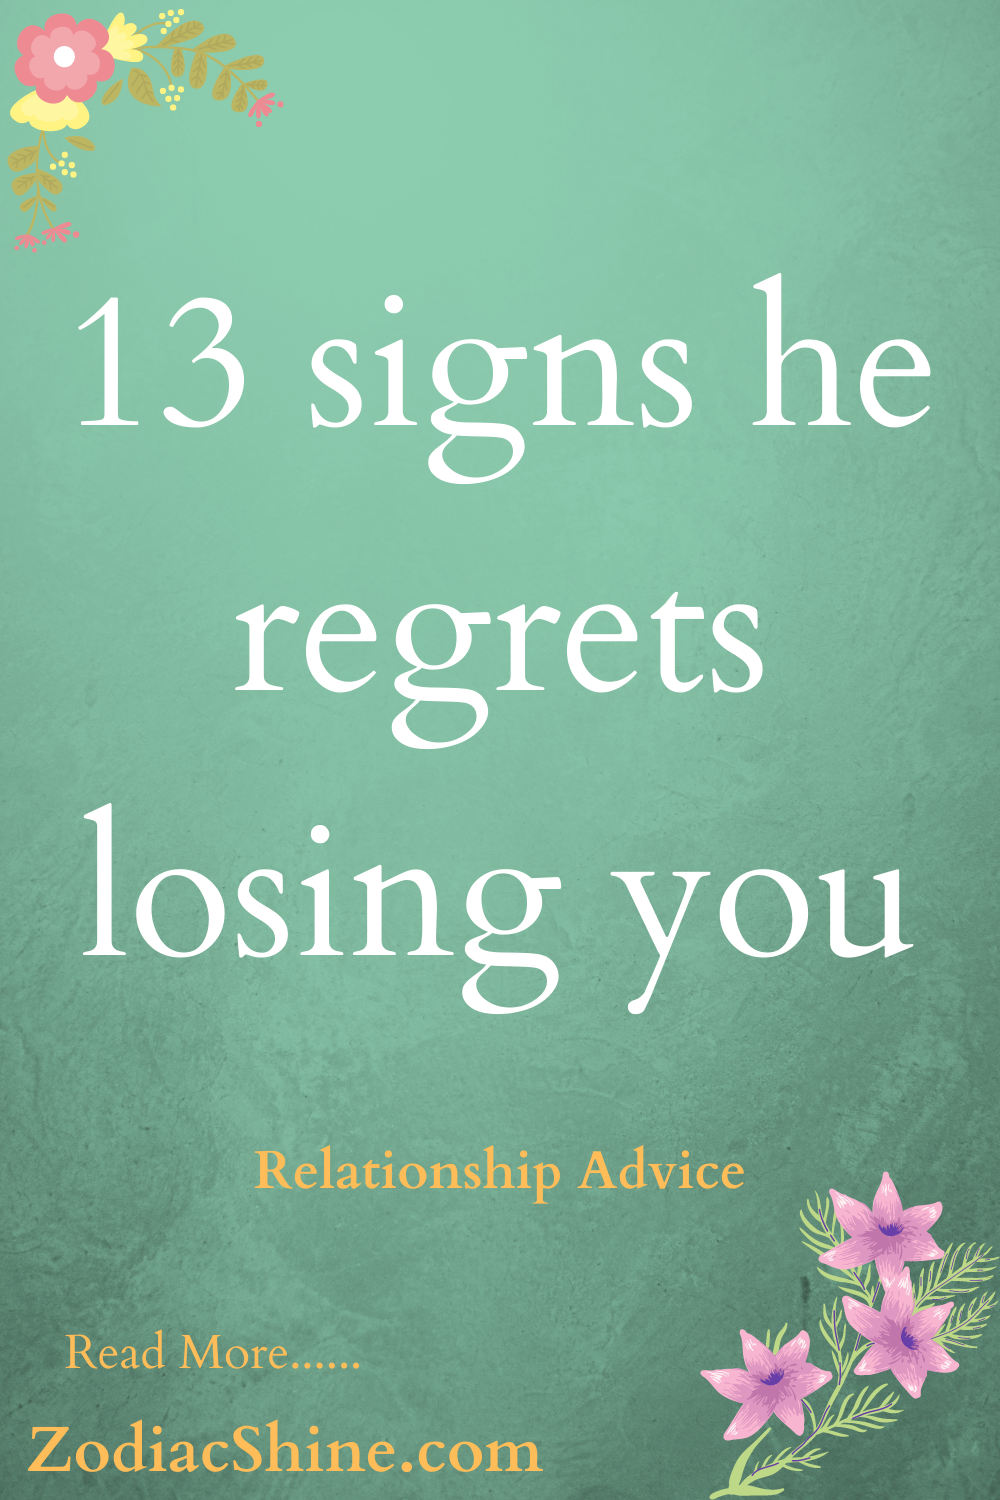 13 signs he regrets losing you